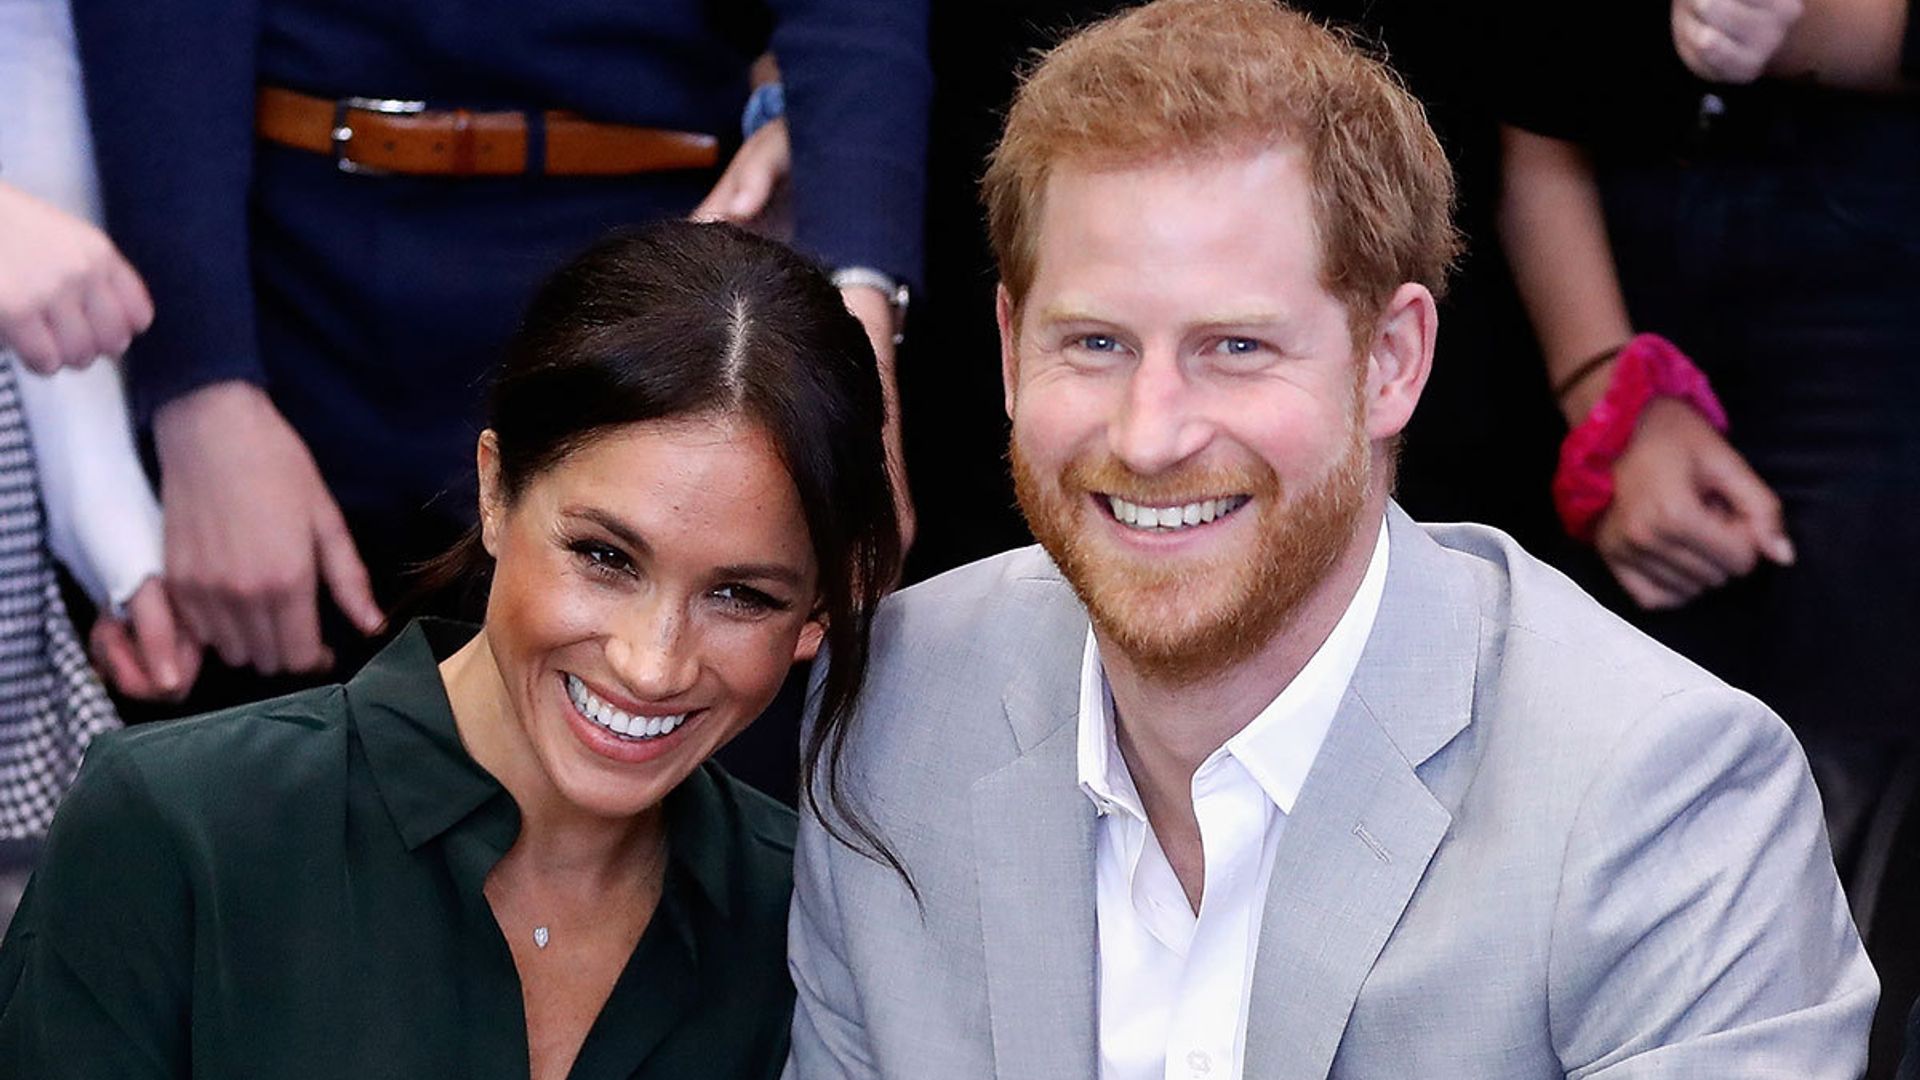 Prince Harry and Duchess Meghan ask fans to donate to four charities in lieu of baby gifts for Lili